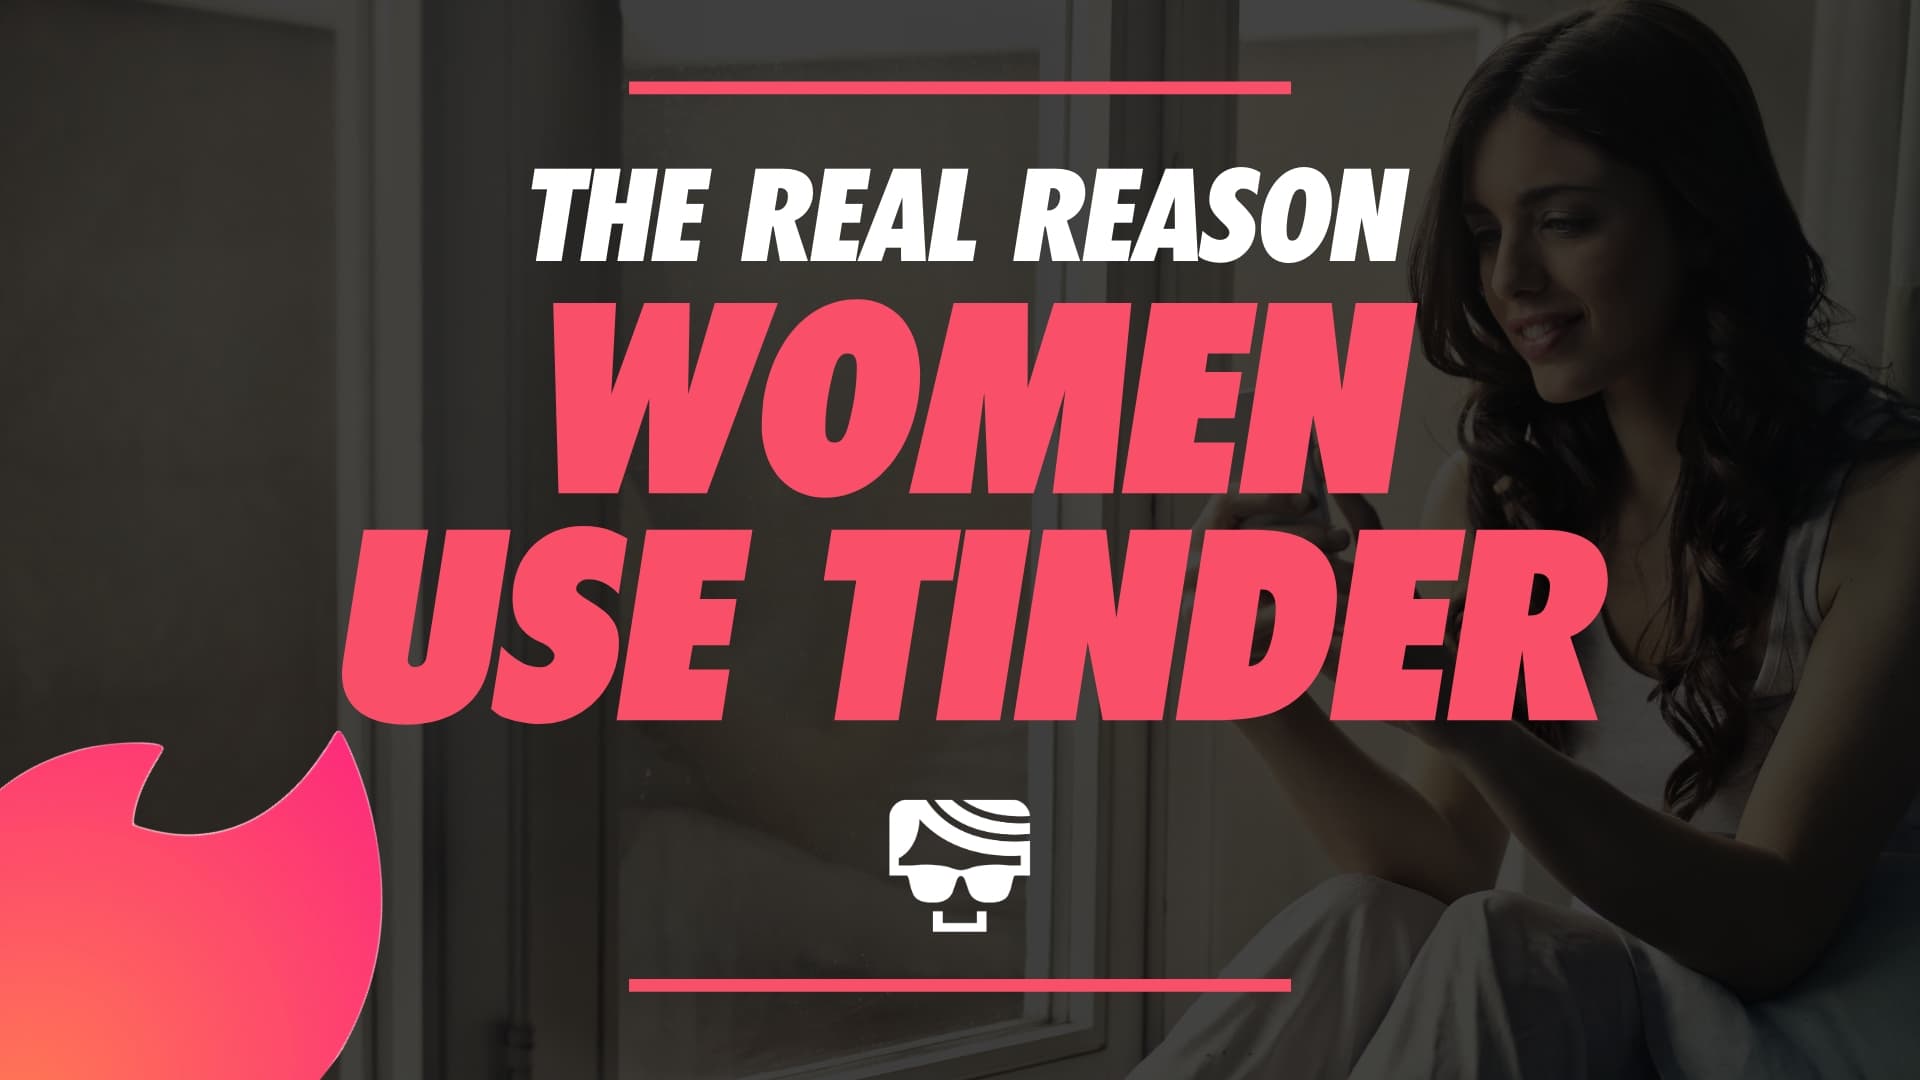 Why Do People Use Tinder? (A Look At Studies Showing Reasons Women Use Tinder)